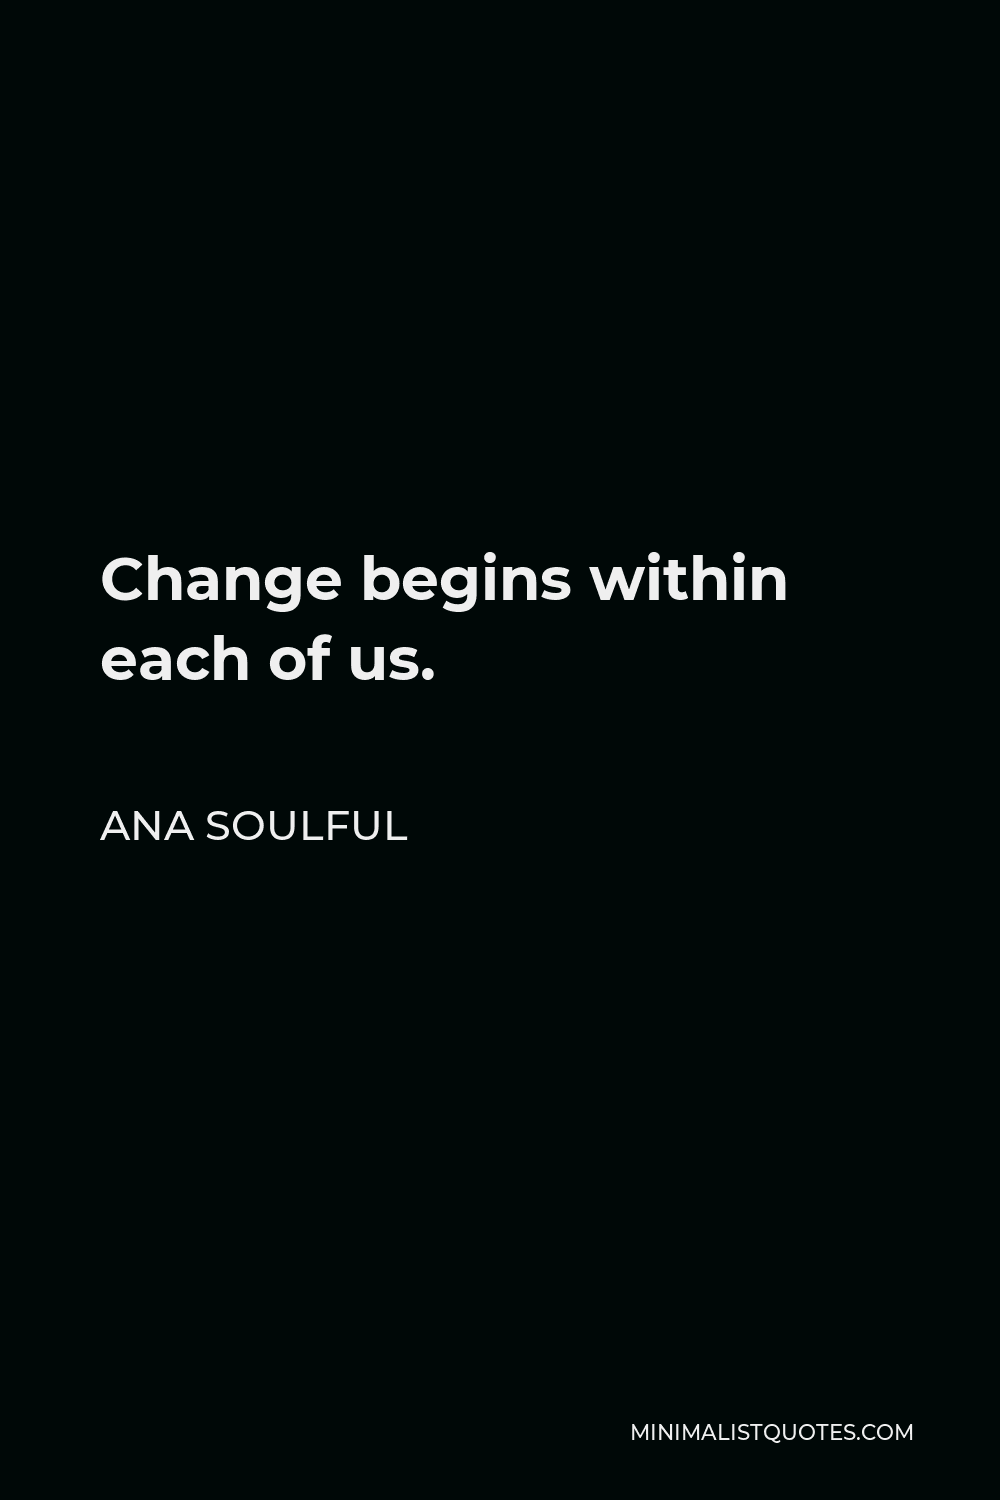 Ana Soulful Quote - Change begins within each of us.